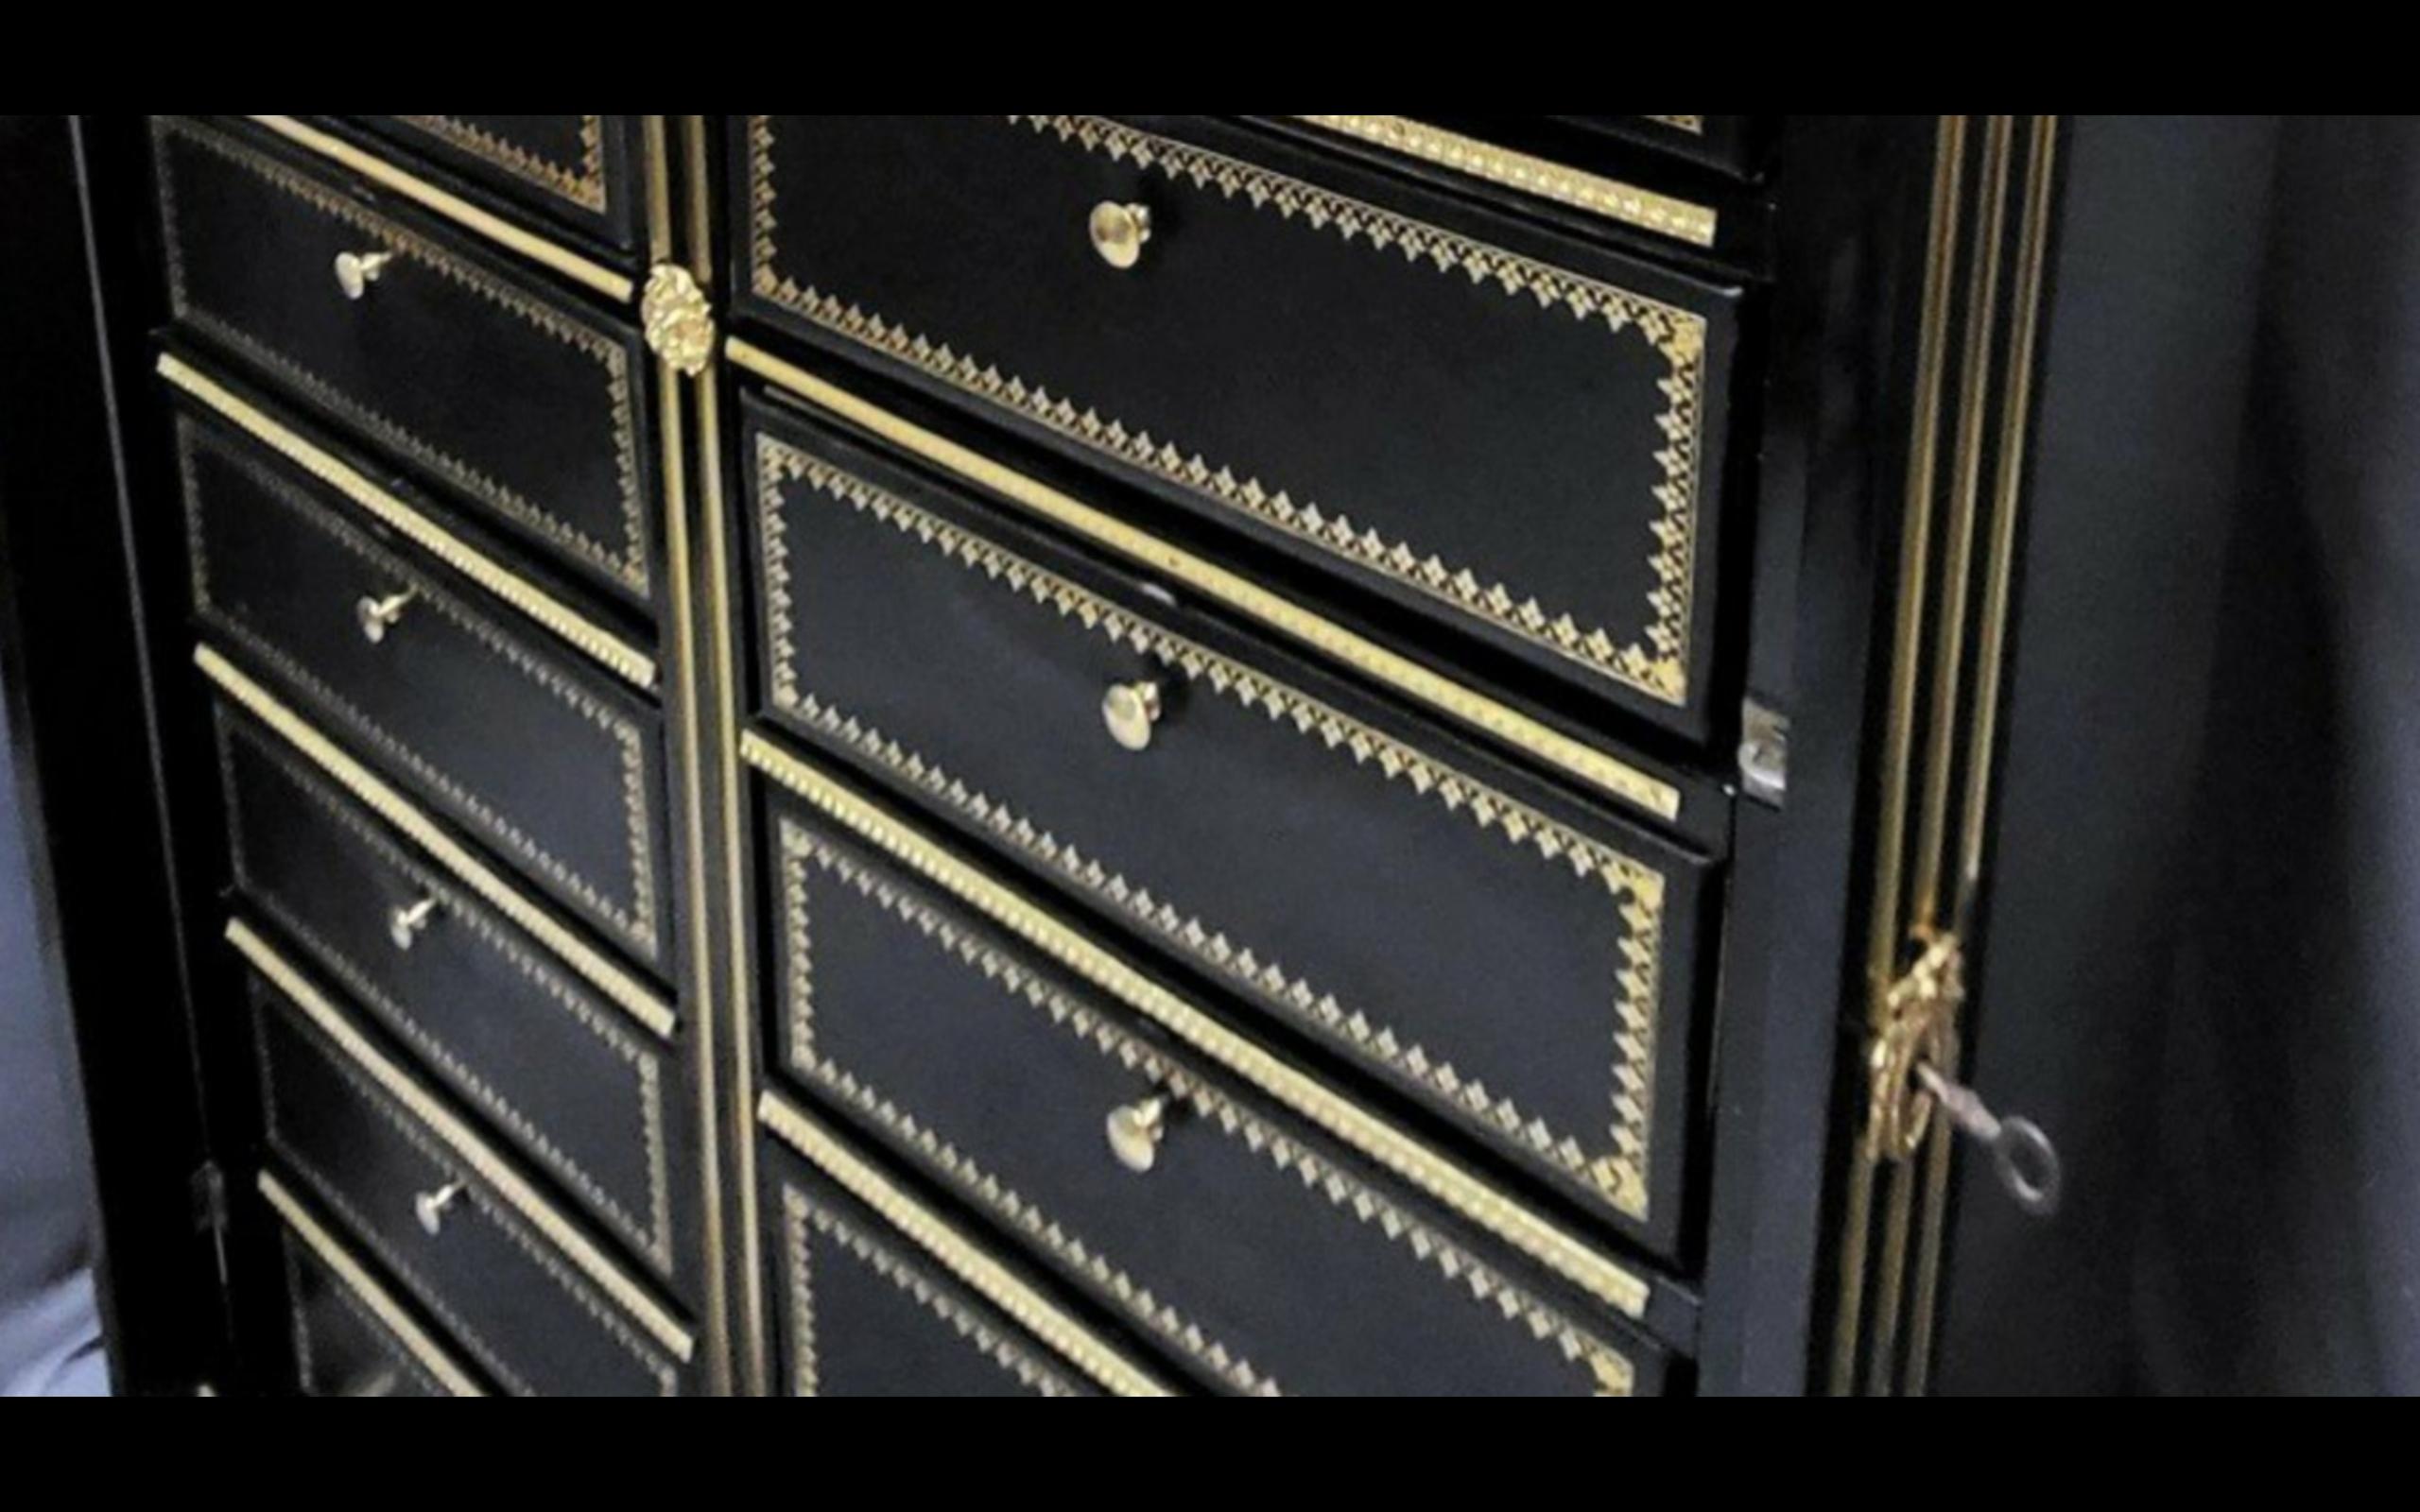 Rare, large and tall notary cardboard boxes cabinet, Napoleon III period around 1870, with rich ornamentation of gilded bronzes such as high and low drops, ingot molds, rosettes, keyholes. Stunning model with 20 thick cardboard boxes with its front